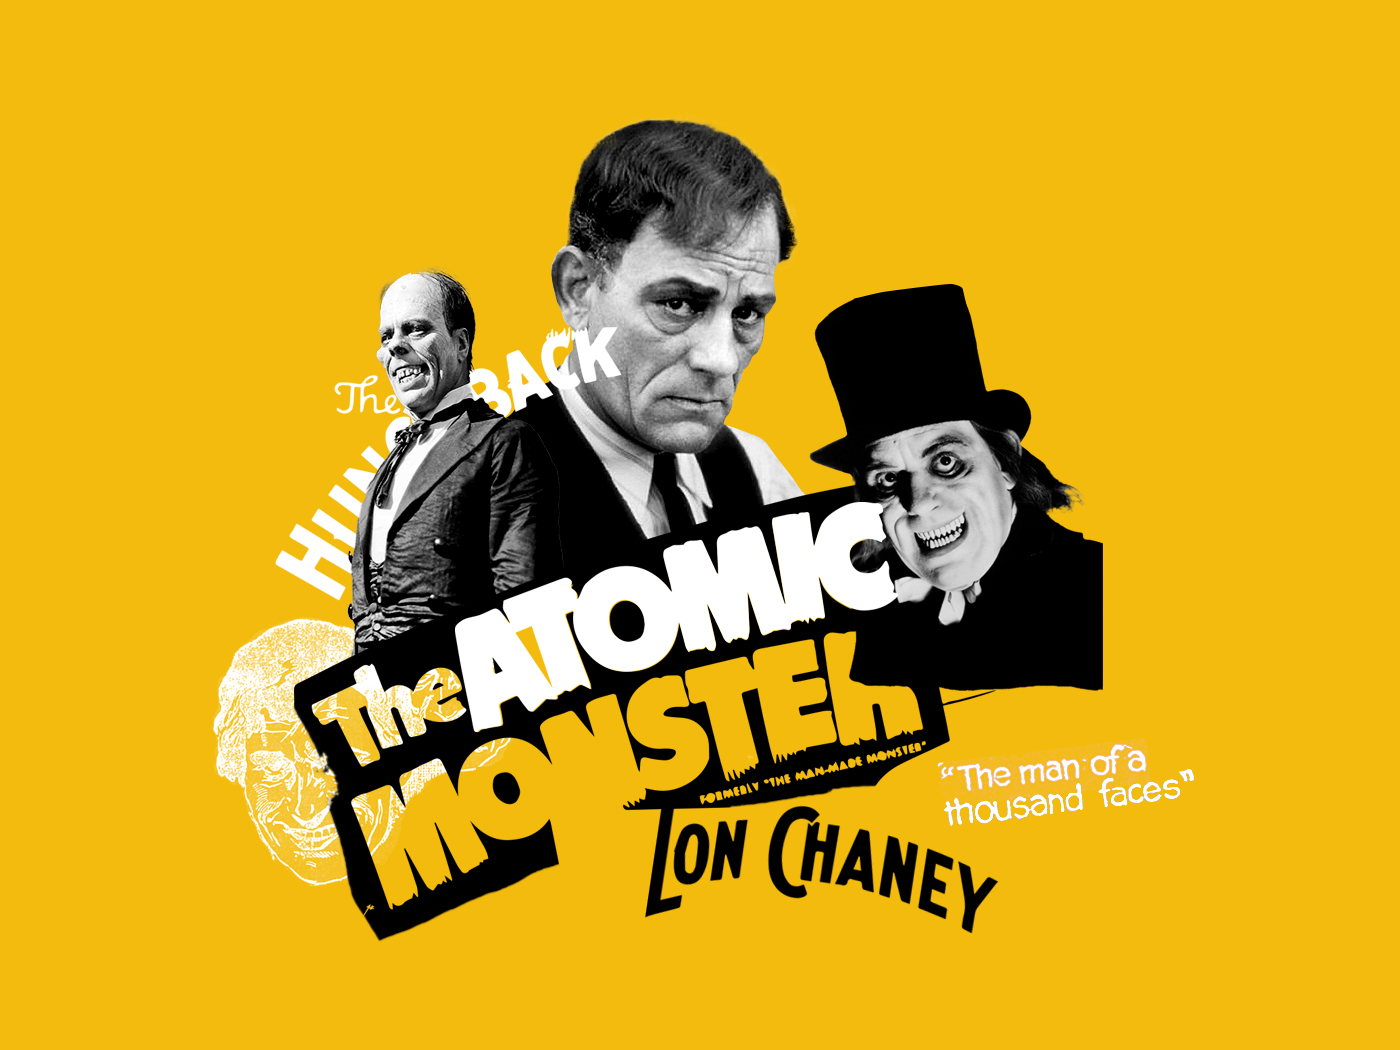 Lon Chaney | Constant icons